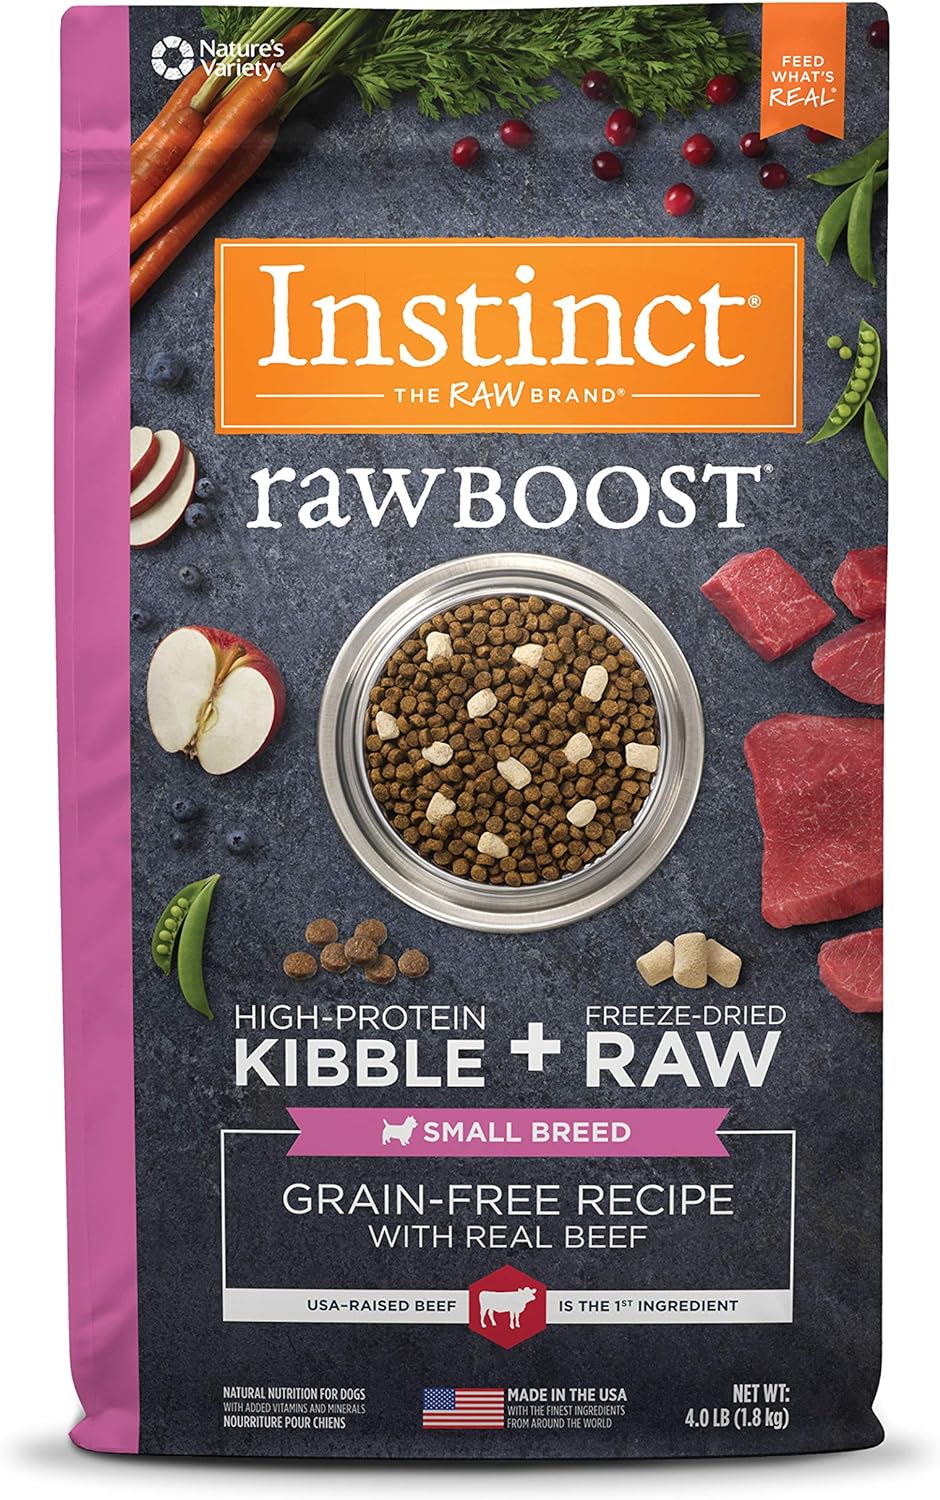 Instinct Raw Boost Grain-Free Recipe with Real Beef for Small Breed Dogs Dry Dog Food – Gallery Image 1